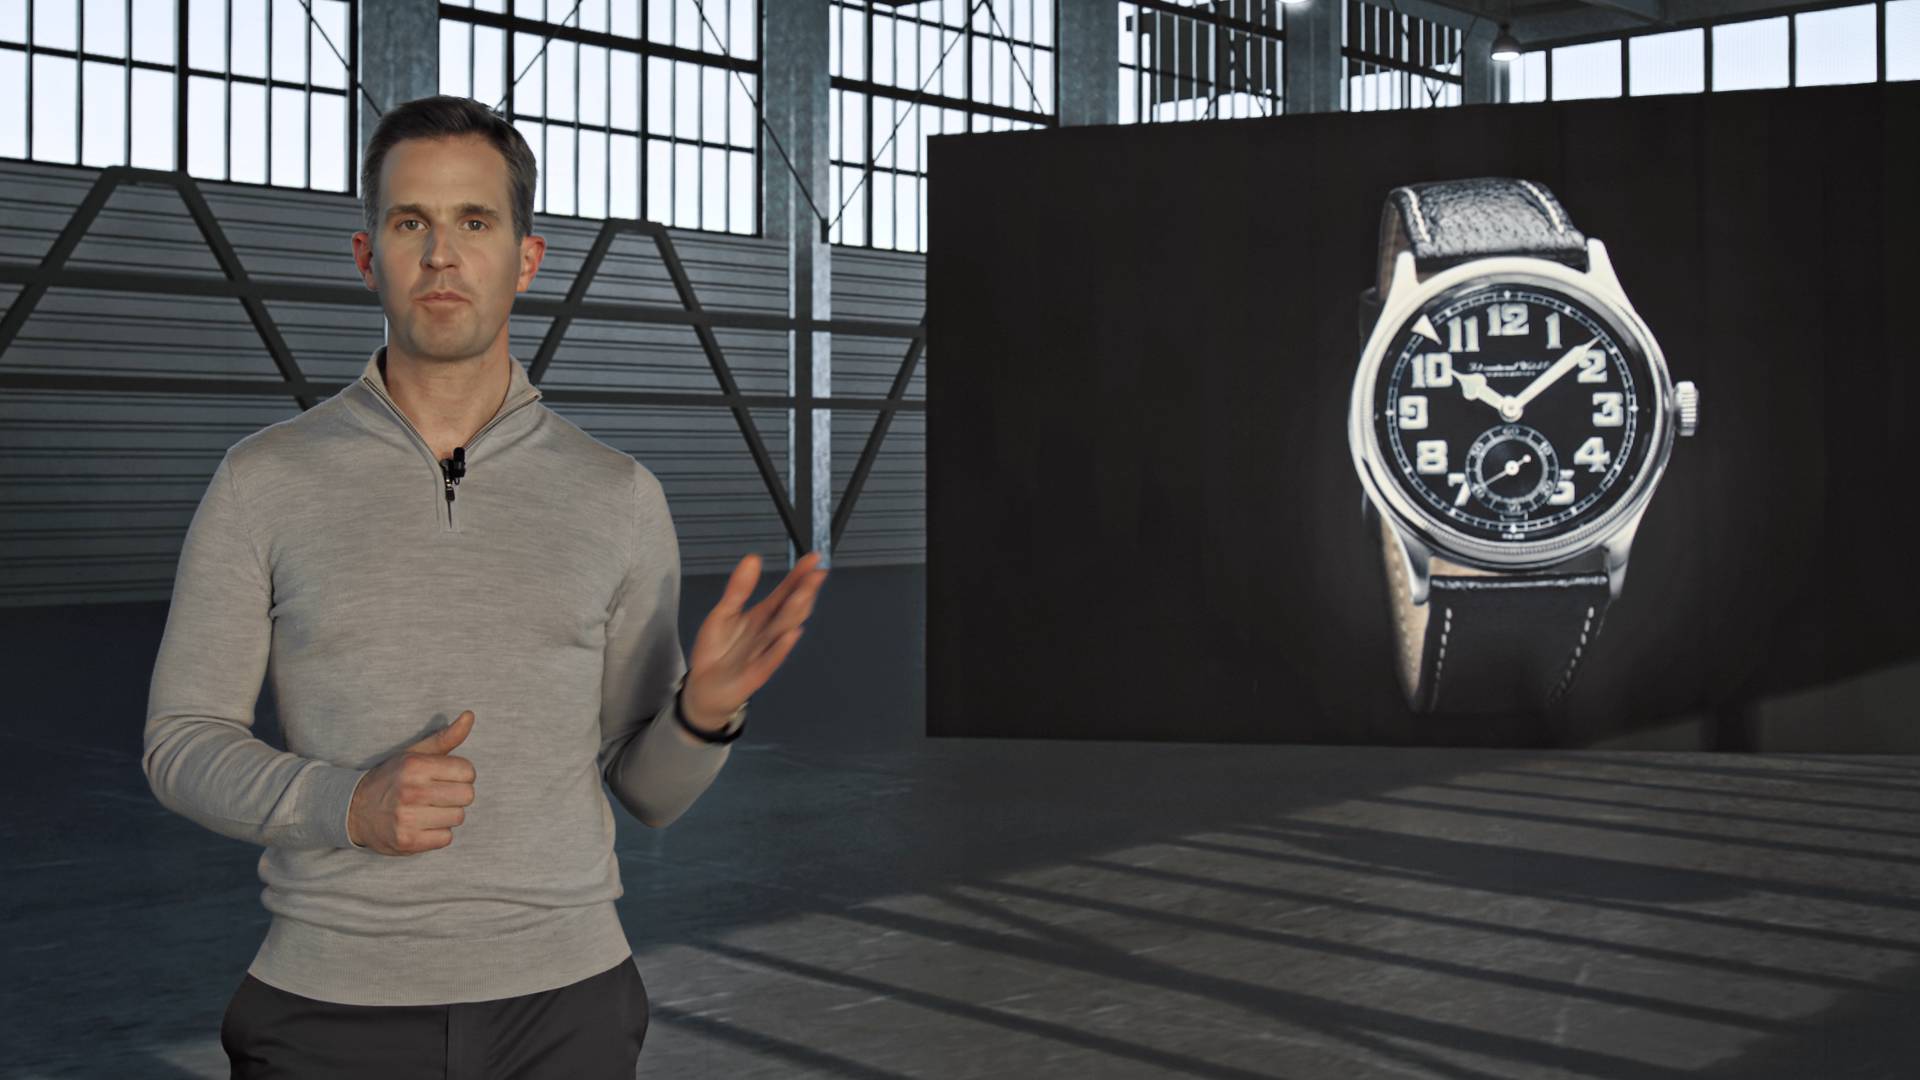 Christopher Grainer Herr, the CEO of IWC, pointing at a watch in a hangar.